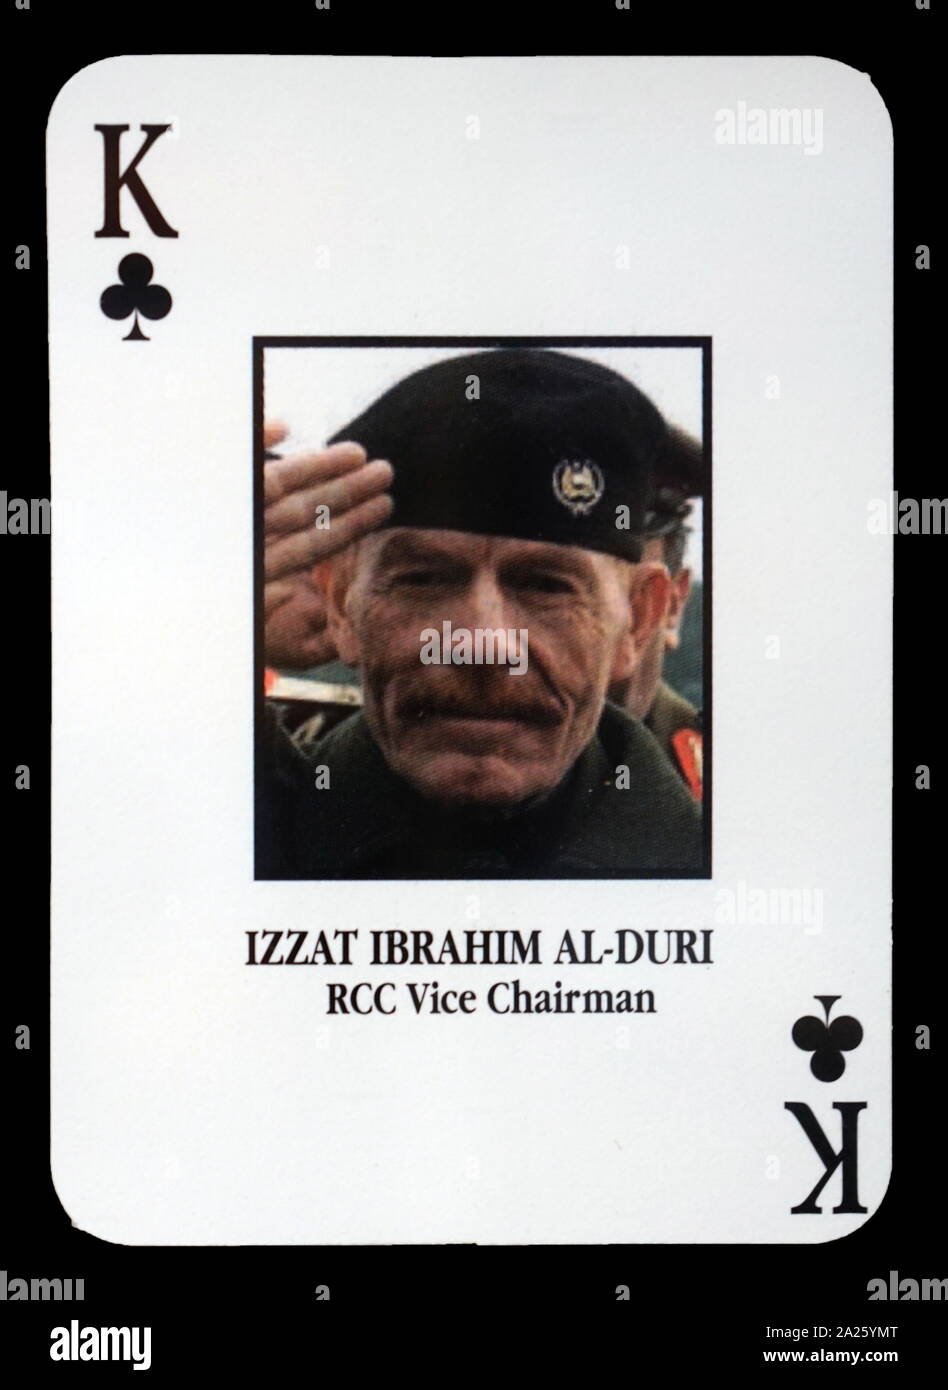 Most-wanted Iraqi playing cards - Izzat Ibrahim Al-Duri (RCC Vice Chairman). The U.S. military developed a set of playing cards to help troop identify the most-wanted members of President Saddam Hussein's government during the 2003 invasion of Iraq. Stock Photo